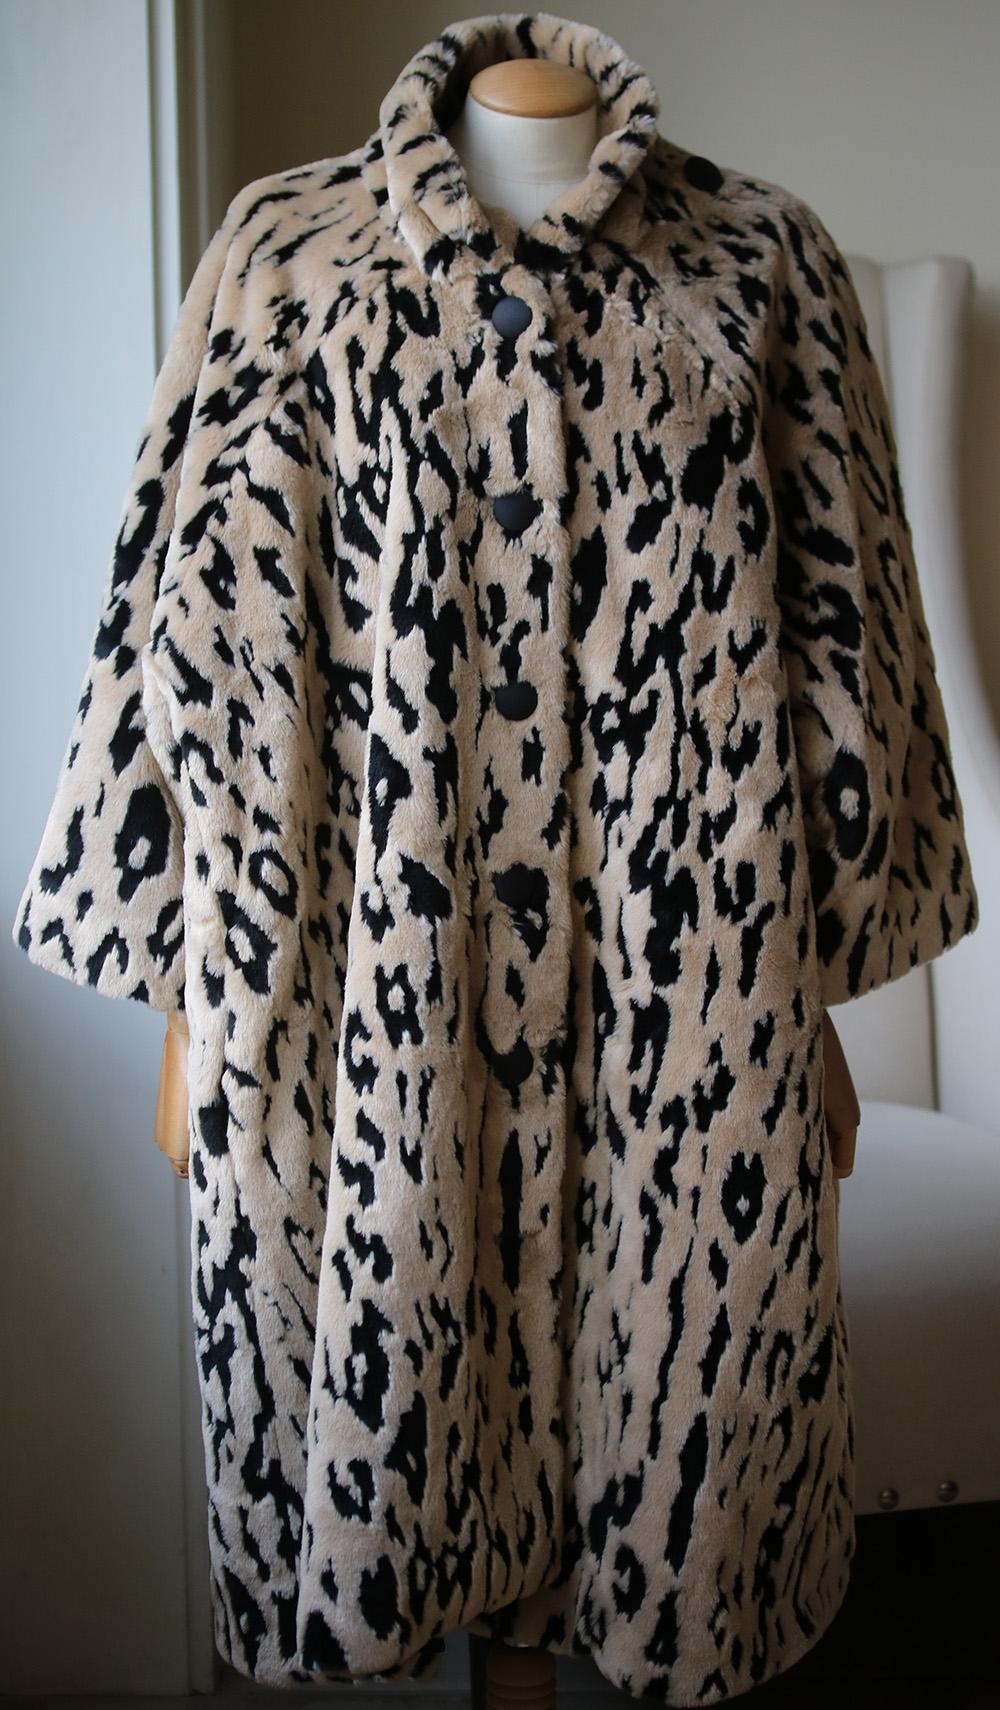 With this oversized coat, Demna Gvasalia is referencing the elegant opera styles created by Cristóbal Balenciaga in the '50s and '60s. This animal-print piece is made from faux fur with bracelet-length sleeves and smooth matte buttons through the